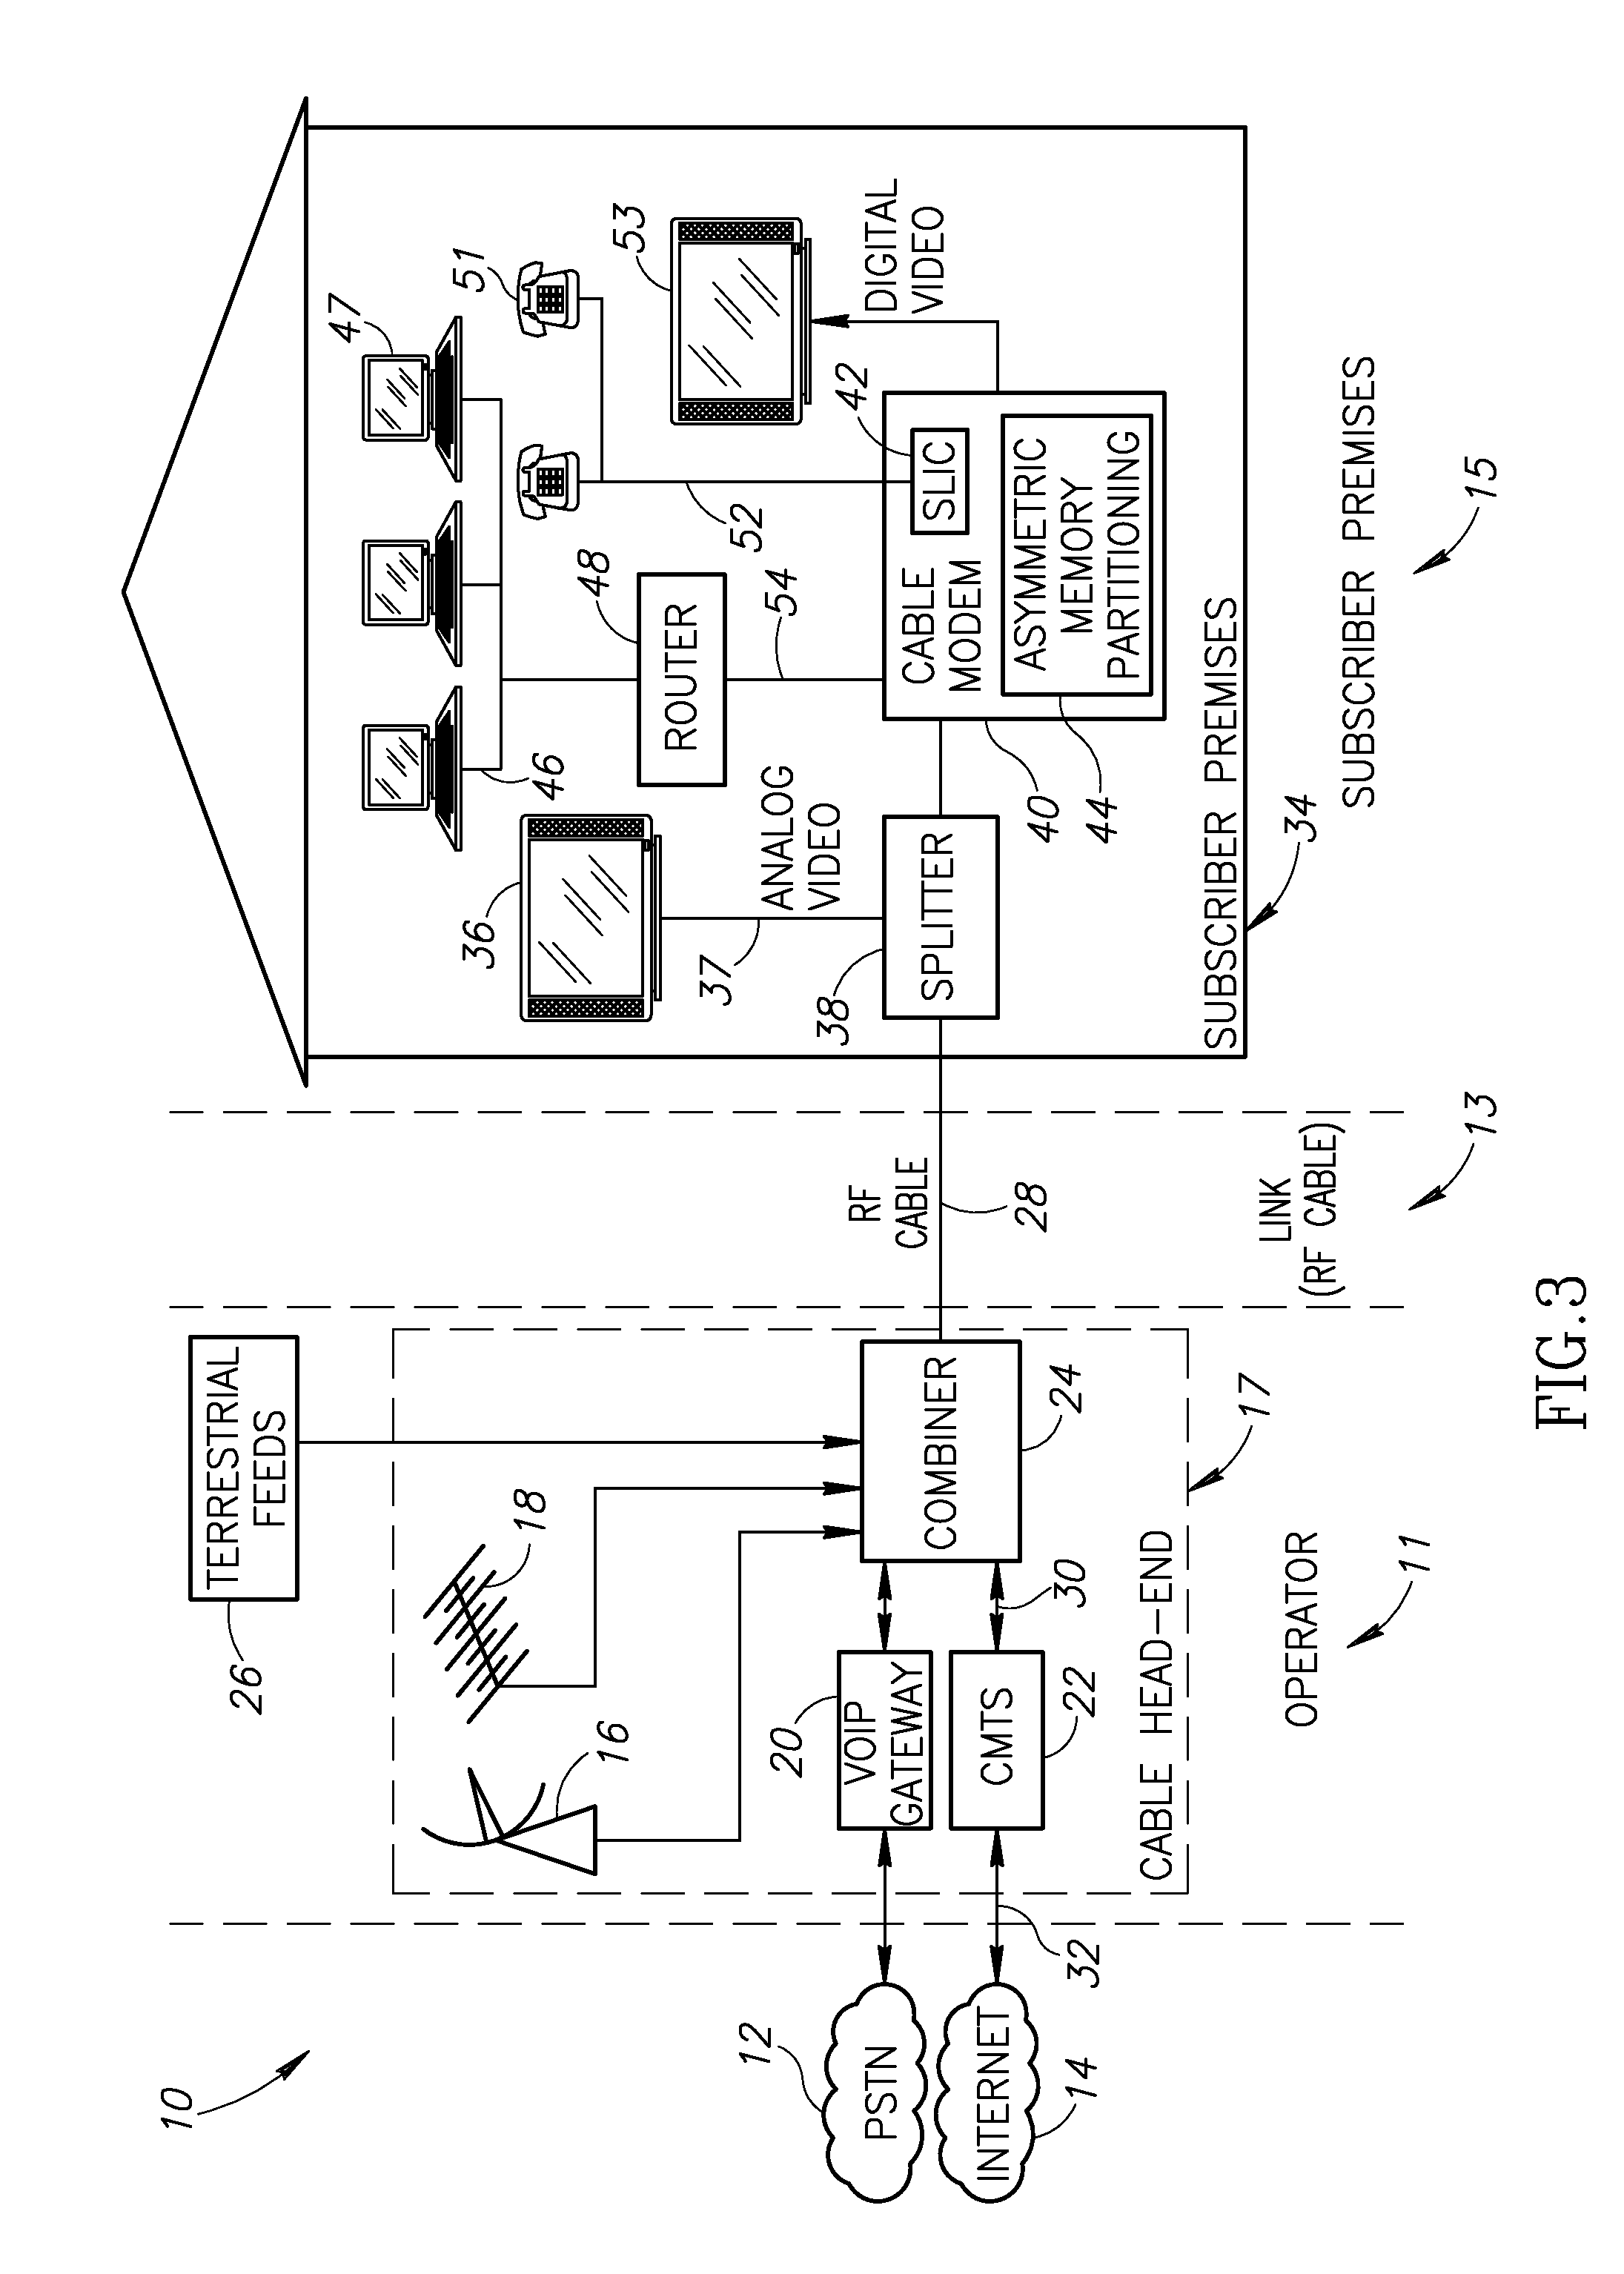 Dynamic asymmetric partitioning of program code memory in network connected devices